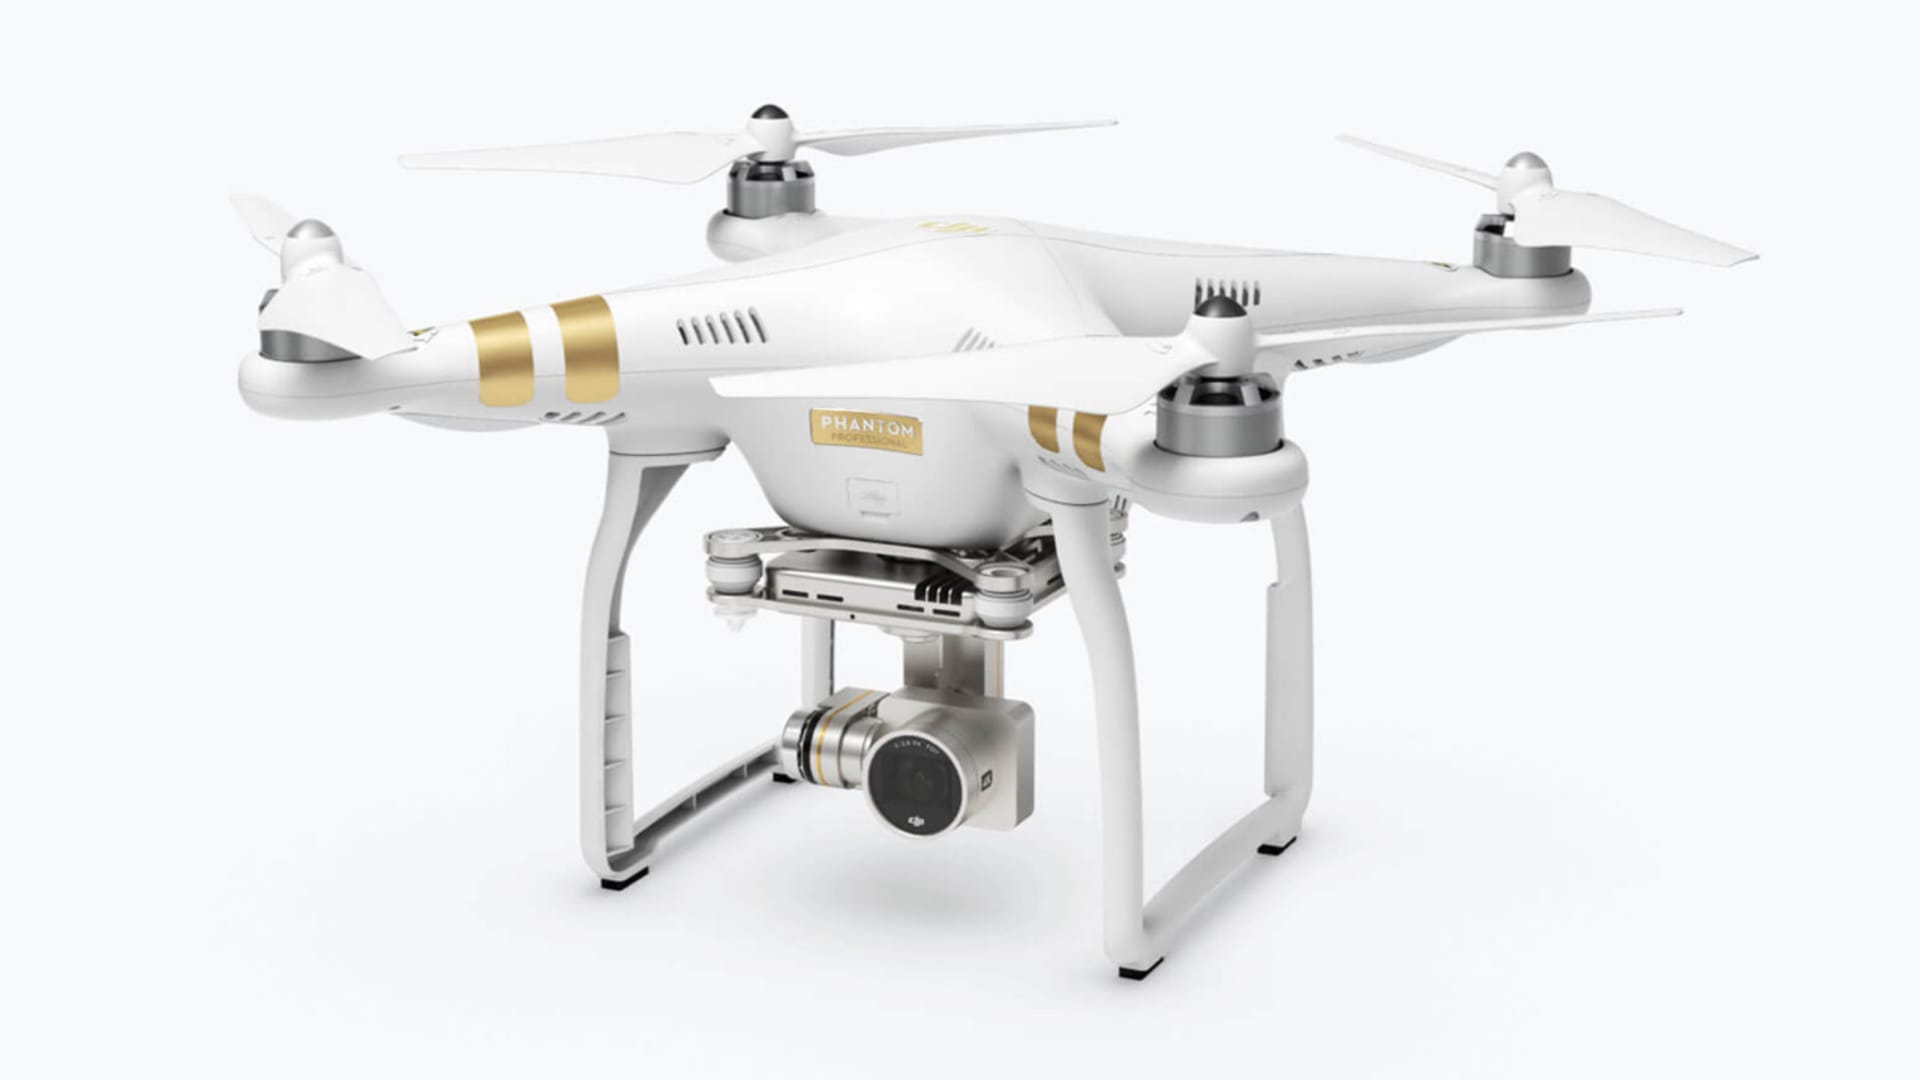 Big Price Drop On Phantom Drone Could Signal Launch Of New Model